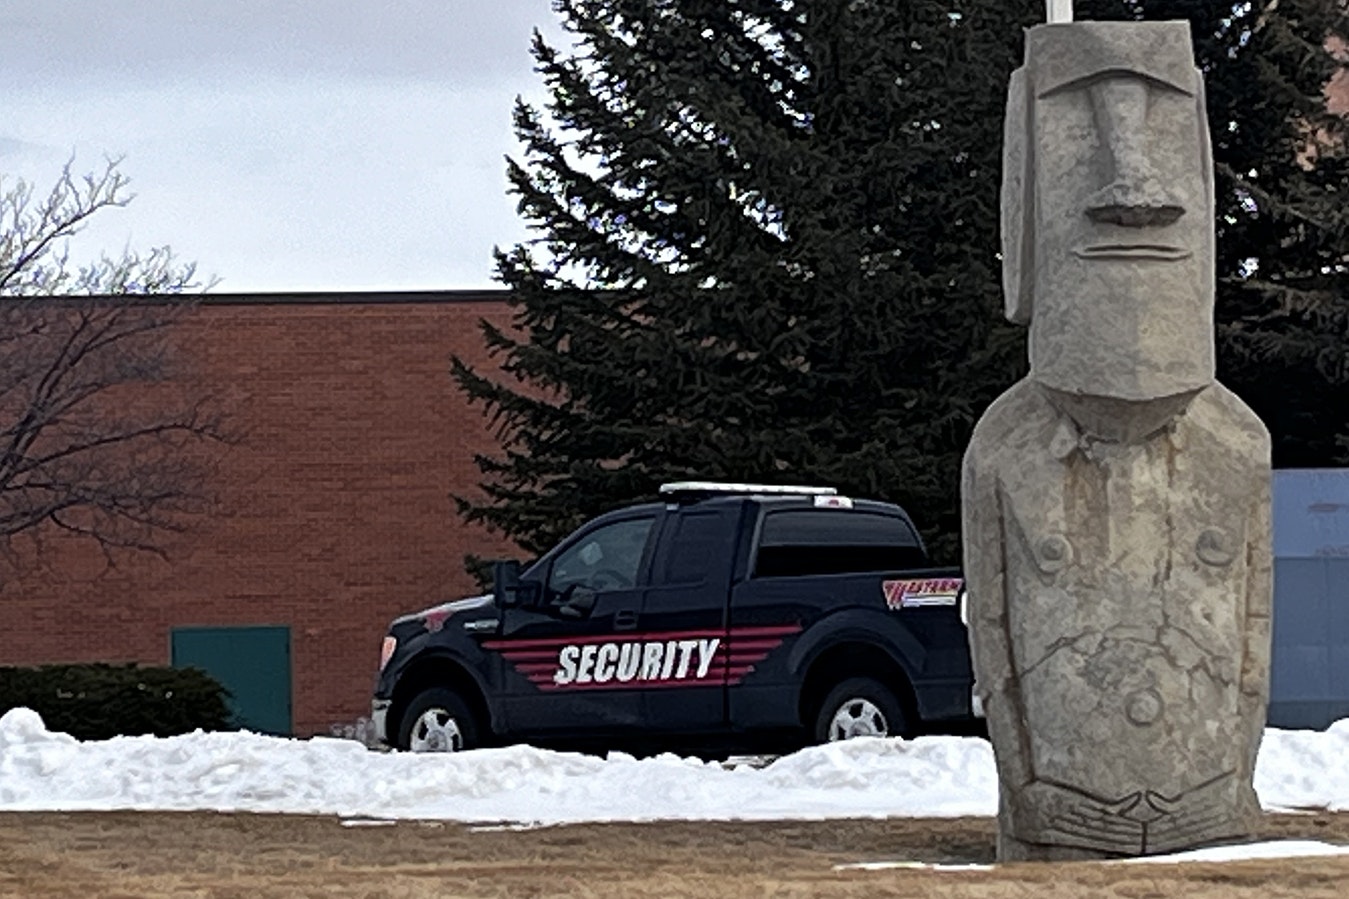 One of a pair of giant 9-ton Moai statues on the campus of Western Wyoming Community College in Rock Springs. They were built in 1987 but, like the Easter Island heads they resemble, why they're there is a mystery.